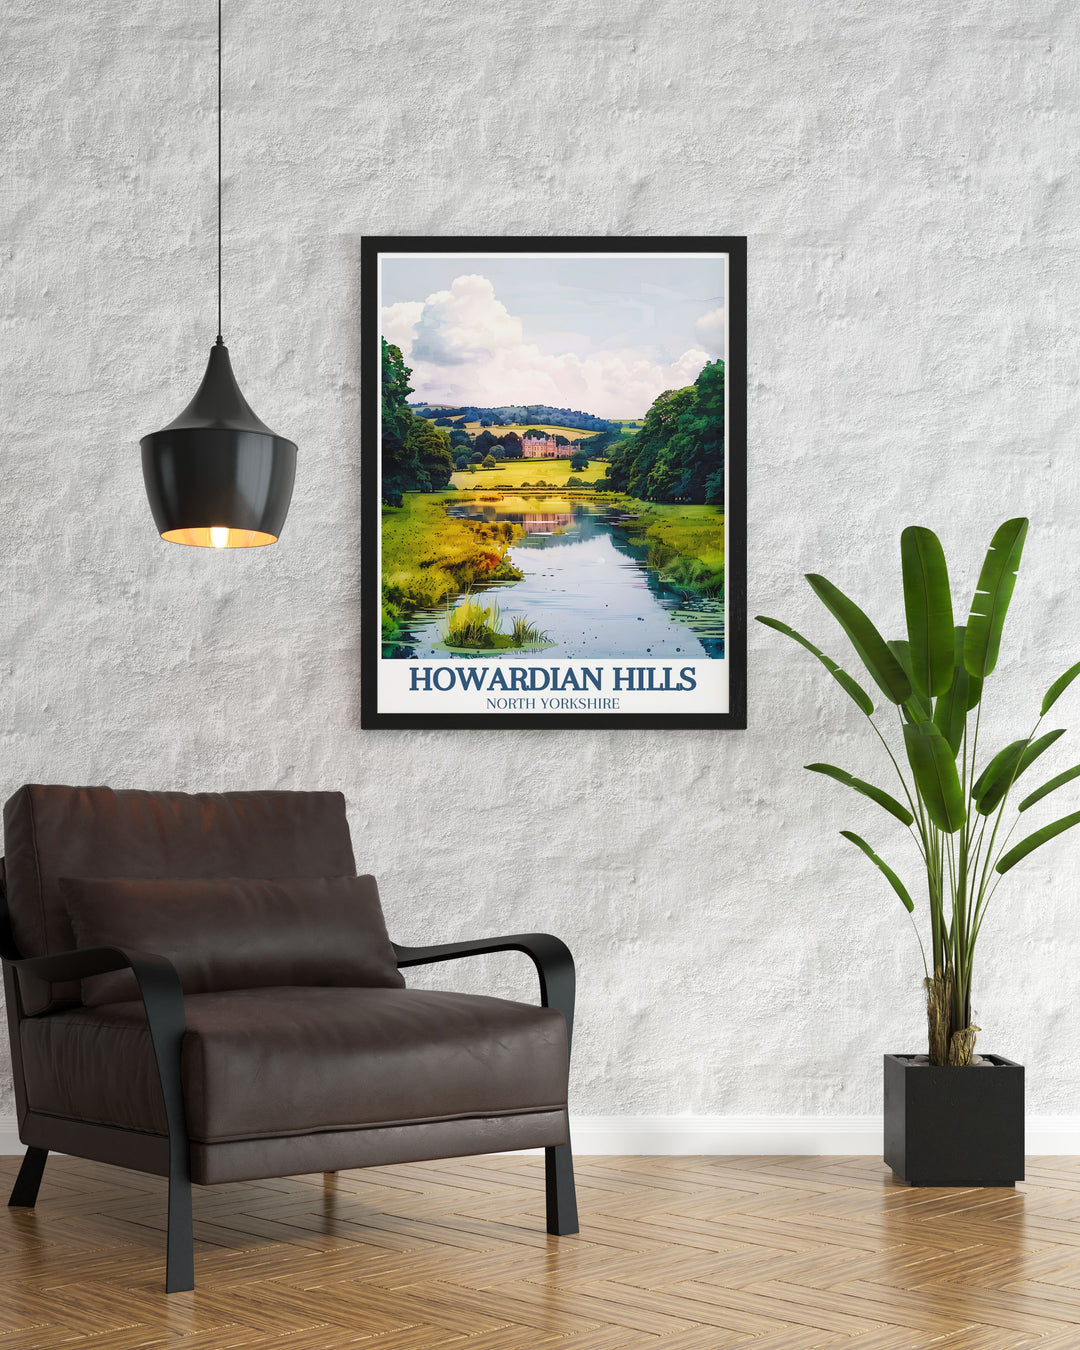 Travel poster depicting the Howardian Hills, highlighting their scenic beauty and diverse wildlife. This piece captures the essence of North Yorkshires countryside, perfect for anyone who loves the great outdoors and picturesque landscapes.